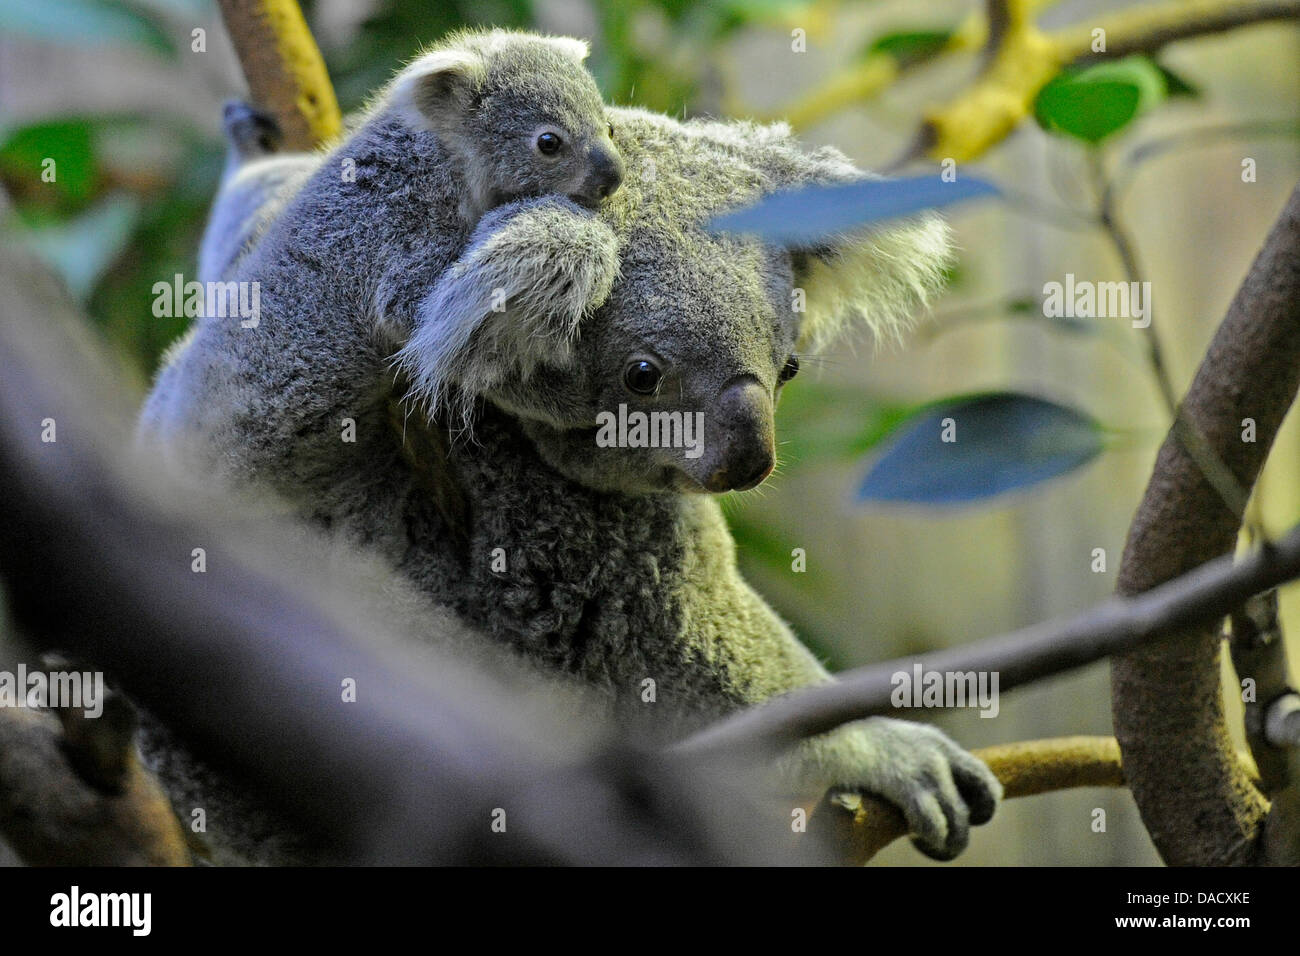 Female Koala Goonderrah climbs with her still nameless baby girl on her back in their enclosure at the zoo in Duisburg, Germany, 21 December 2011. The baby animal was born in May 2011 and has left her mother's pouch in the meantime. The zoo in Duisburg is the only zoo in Germany that keeps koalas. The first koalas arrived from the San Diego Zoo in 1994 and over a dozen baby koalas  Stock Photo